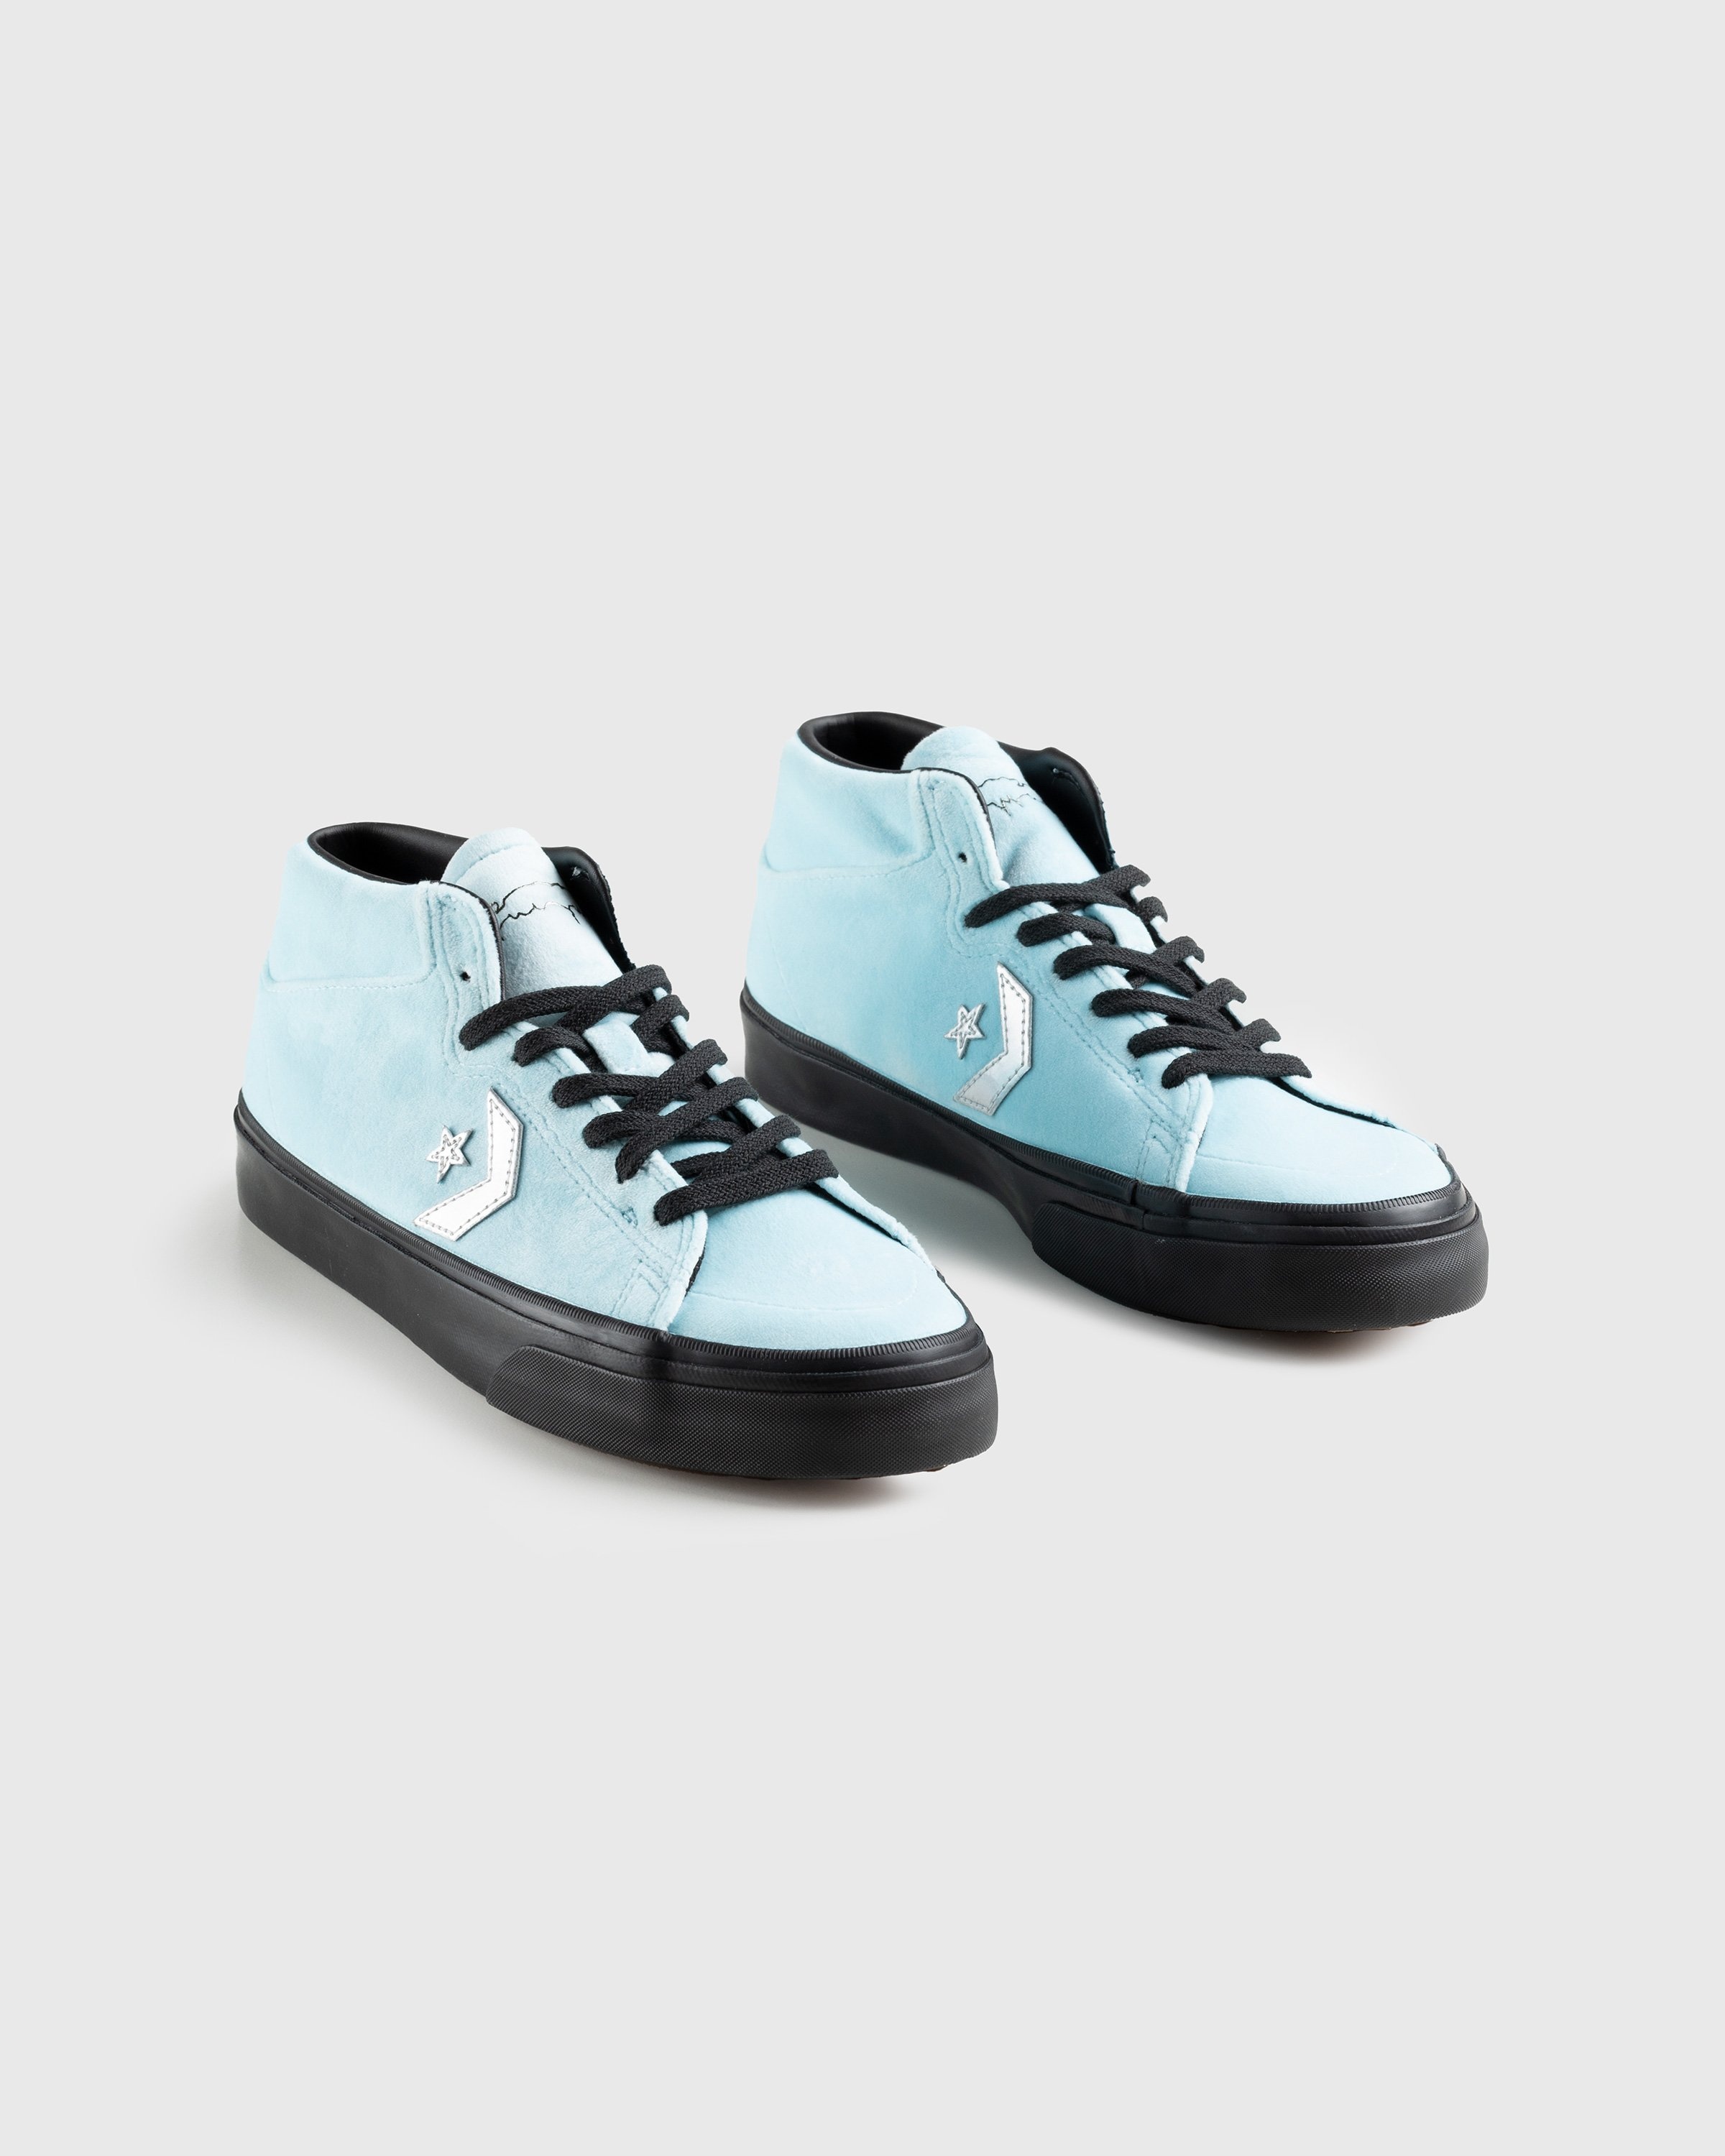 Converse x Fucking Awesome – Louie Lopez Pro Mid Cyan Tint/Black - High Top Sneakers - Blue - Image 3